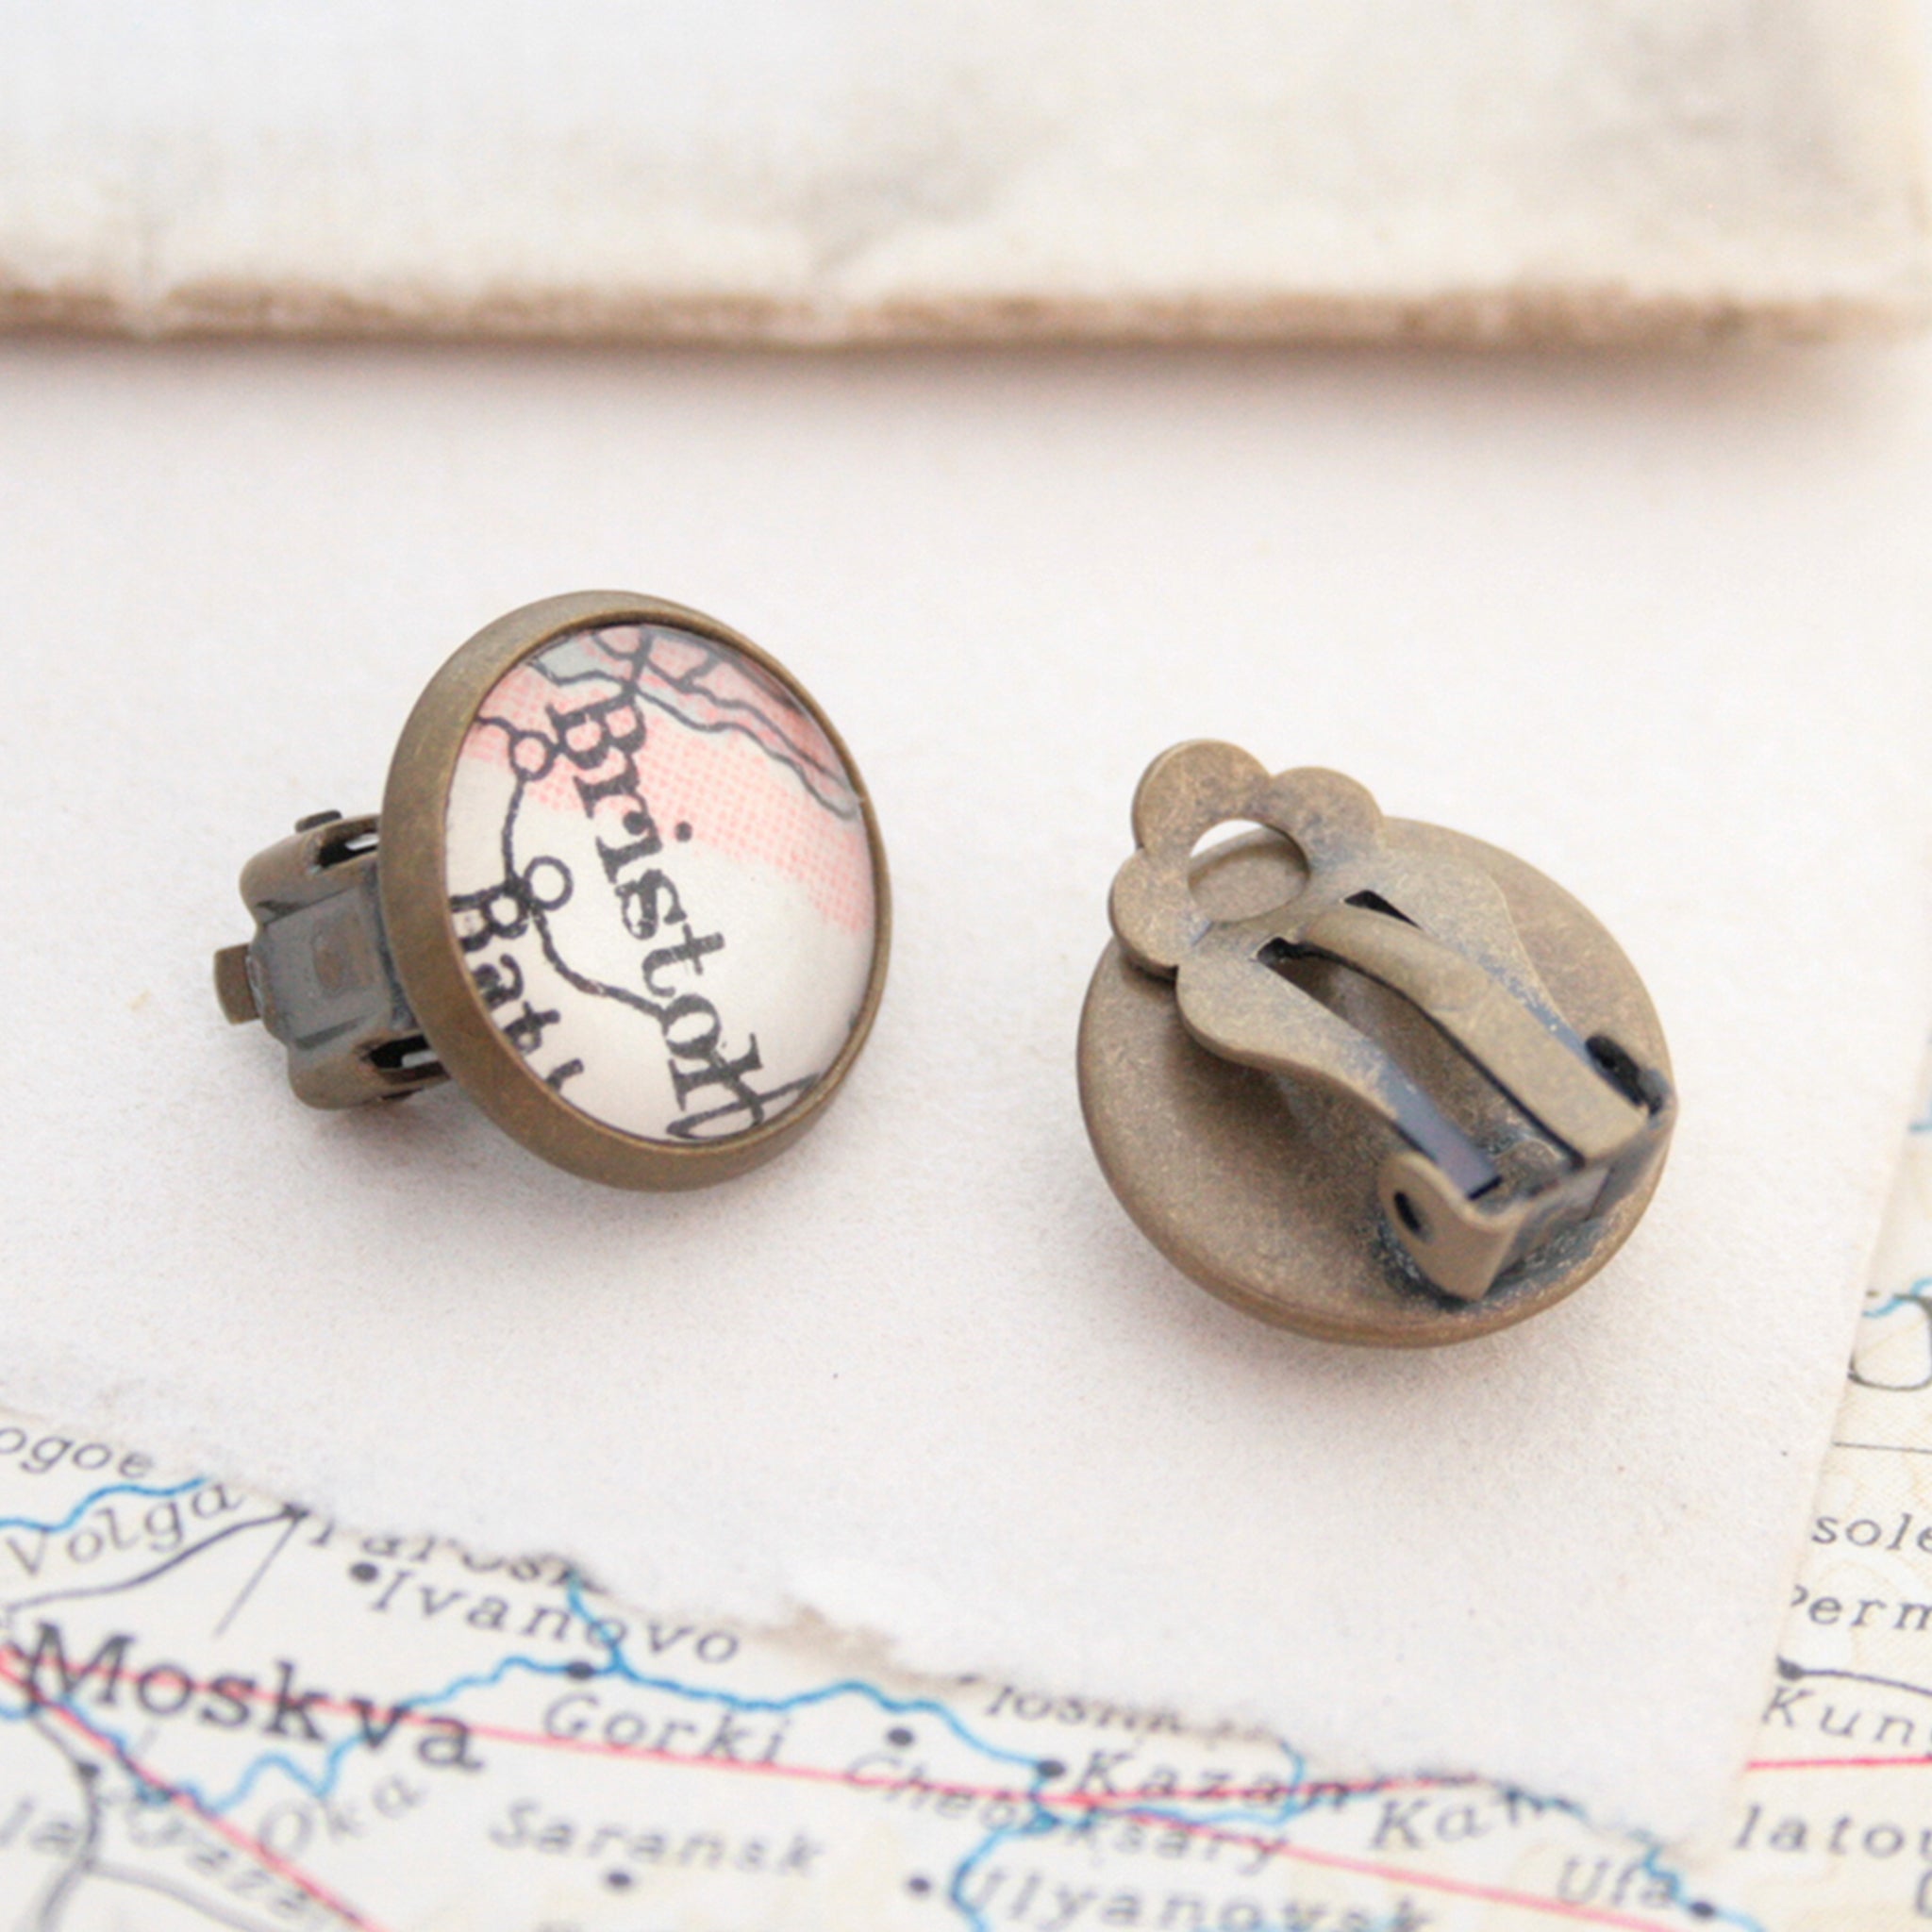 Custom clip on earrings in bronze tone featuring vintage maps